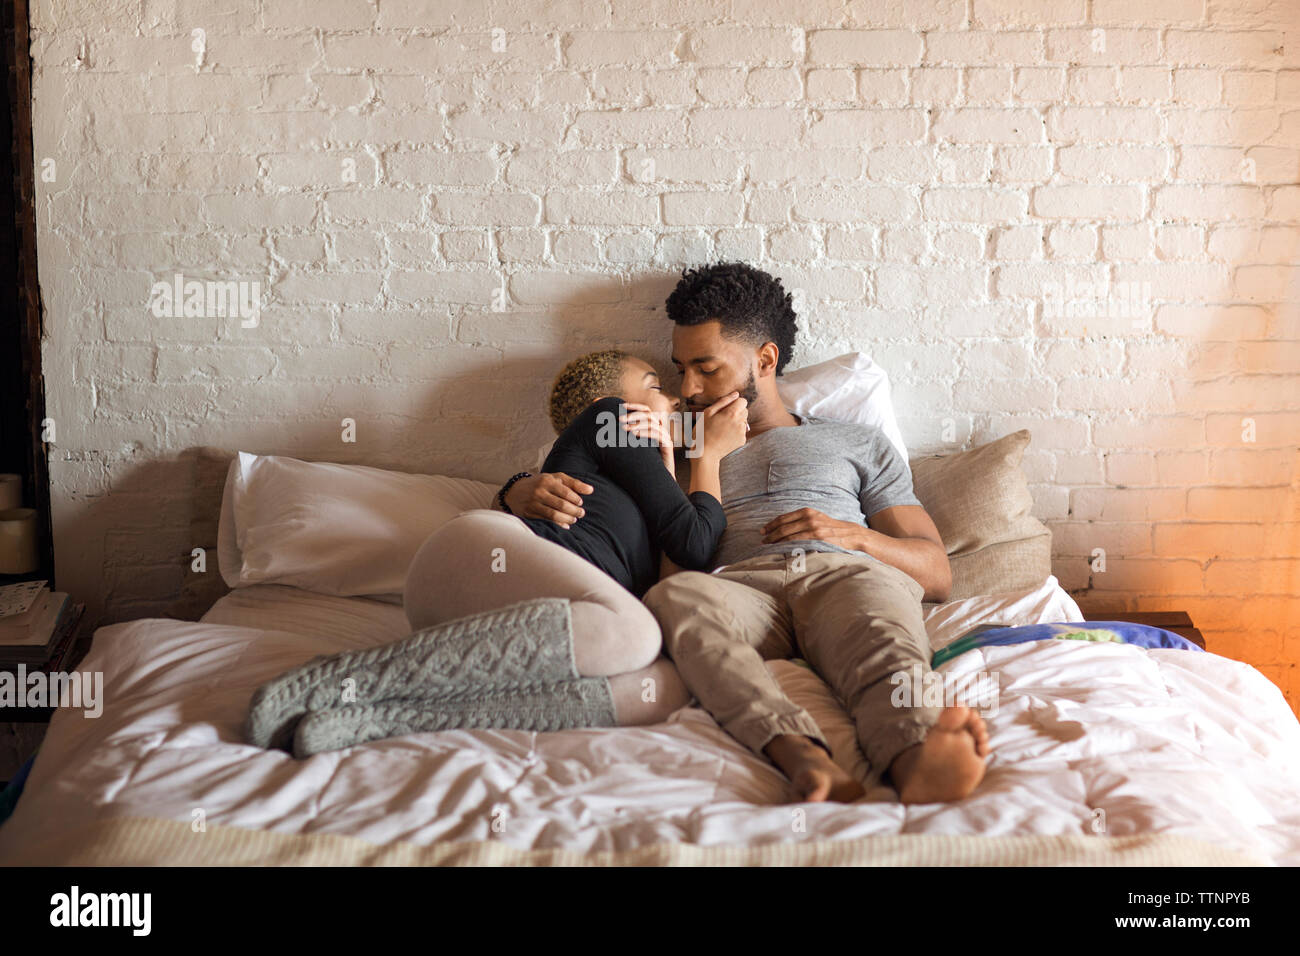 Affectionate couple spending quality time in bedroom Stock Photo